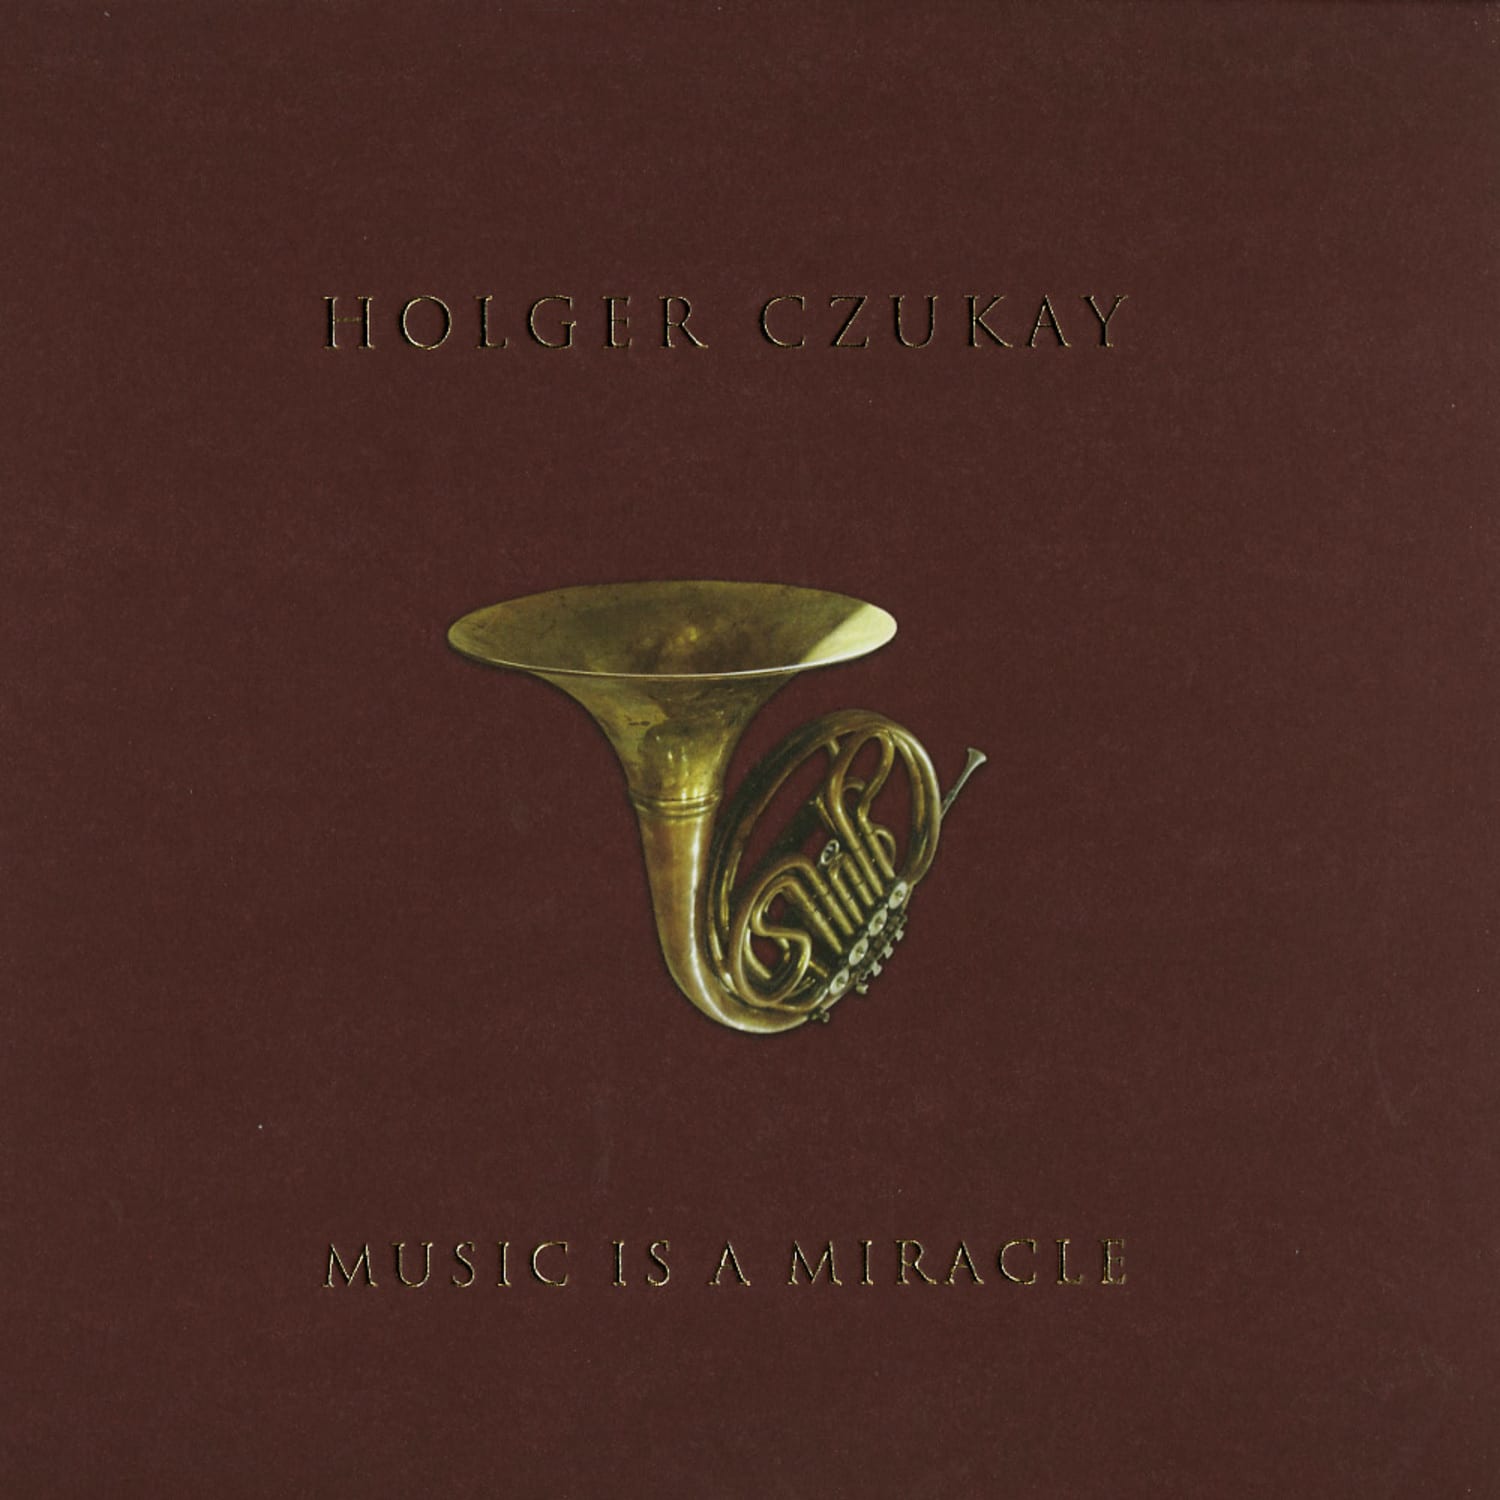 Holger Czukay - MUSIC IS A MIRACLE 